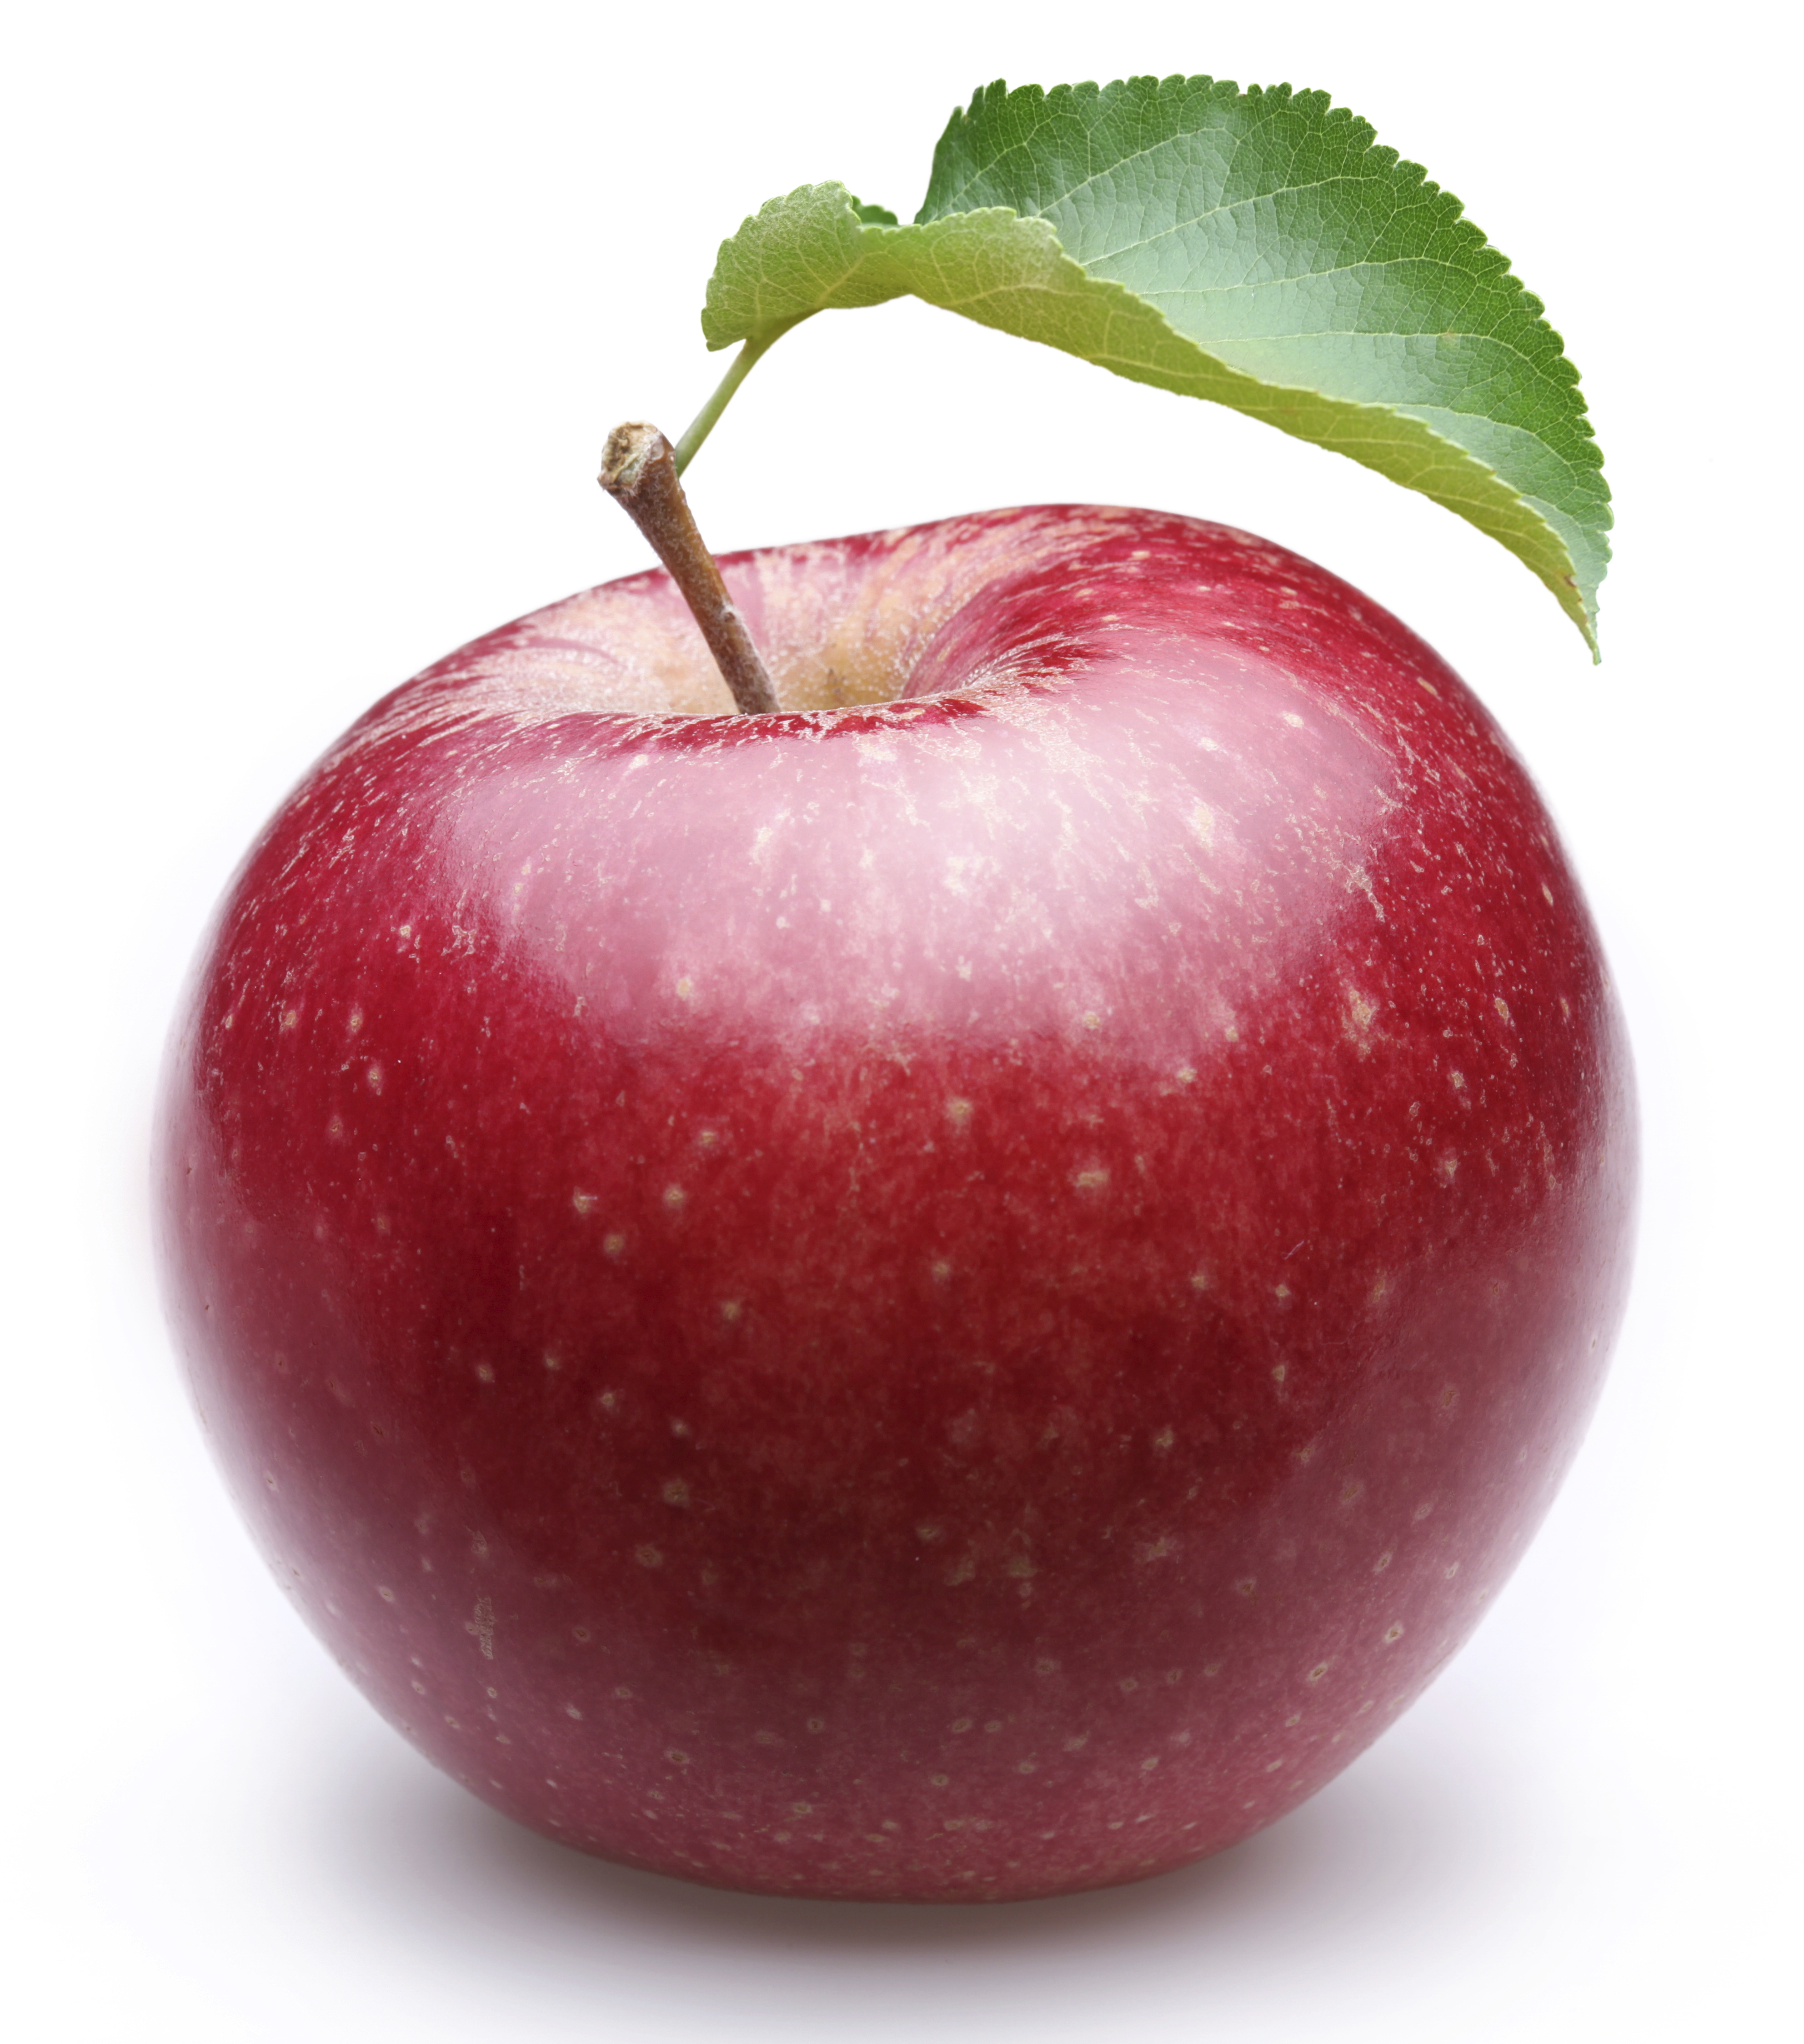 The Apple: A Perfect Fruit for Weight Loss? – The Secret Ingredient